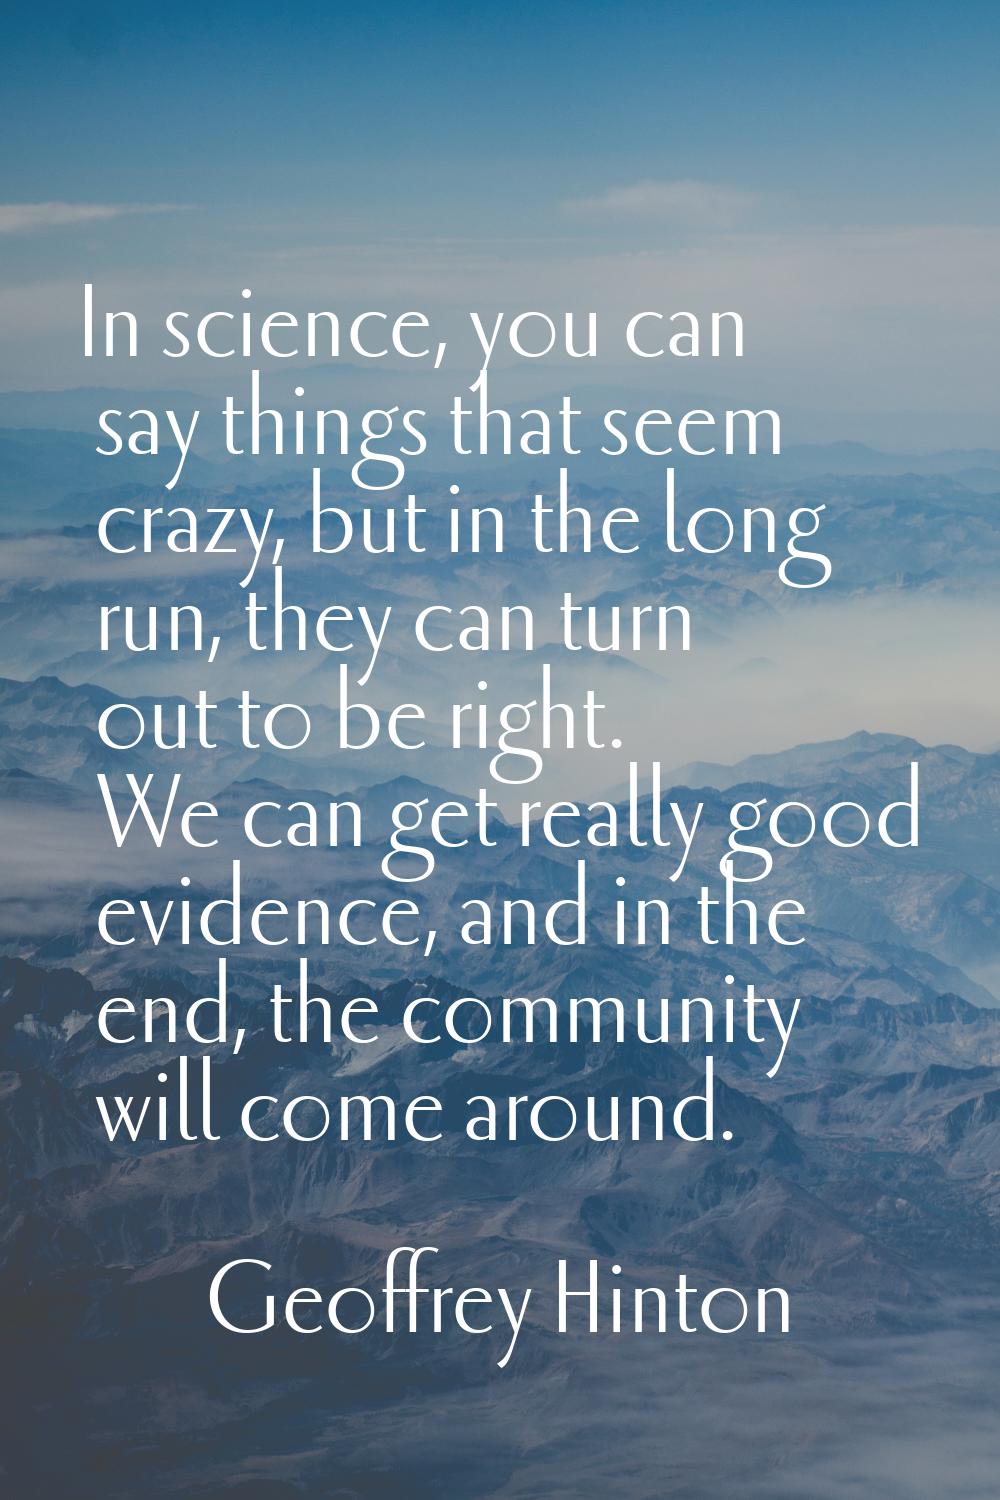 In science, you can say things that seem crazy, but in the long run, they can turn out to be right.